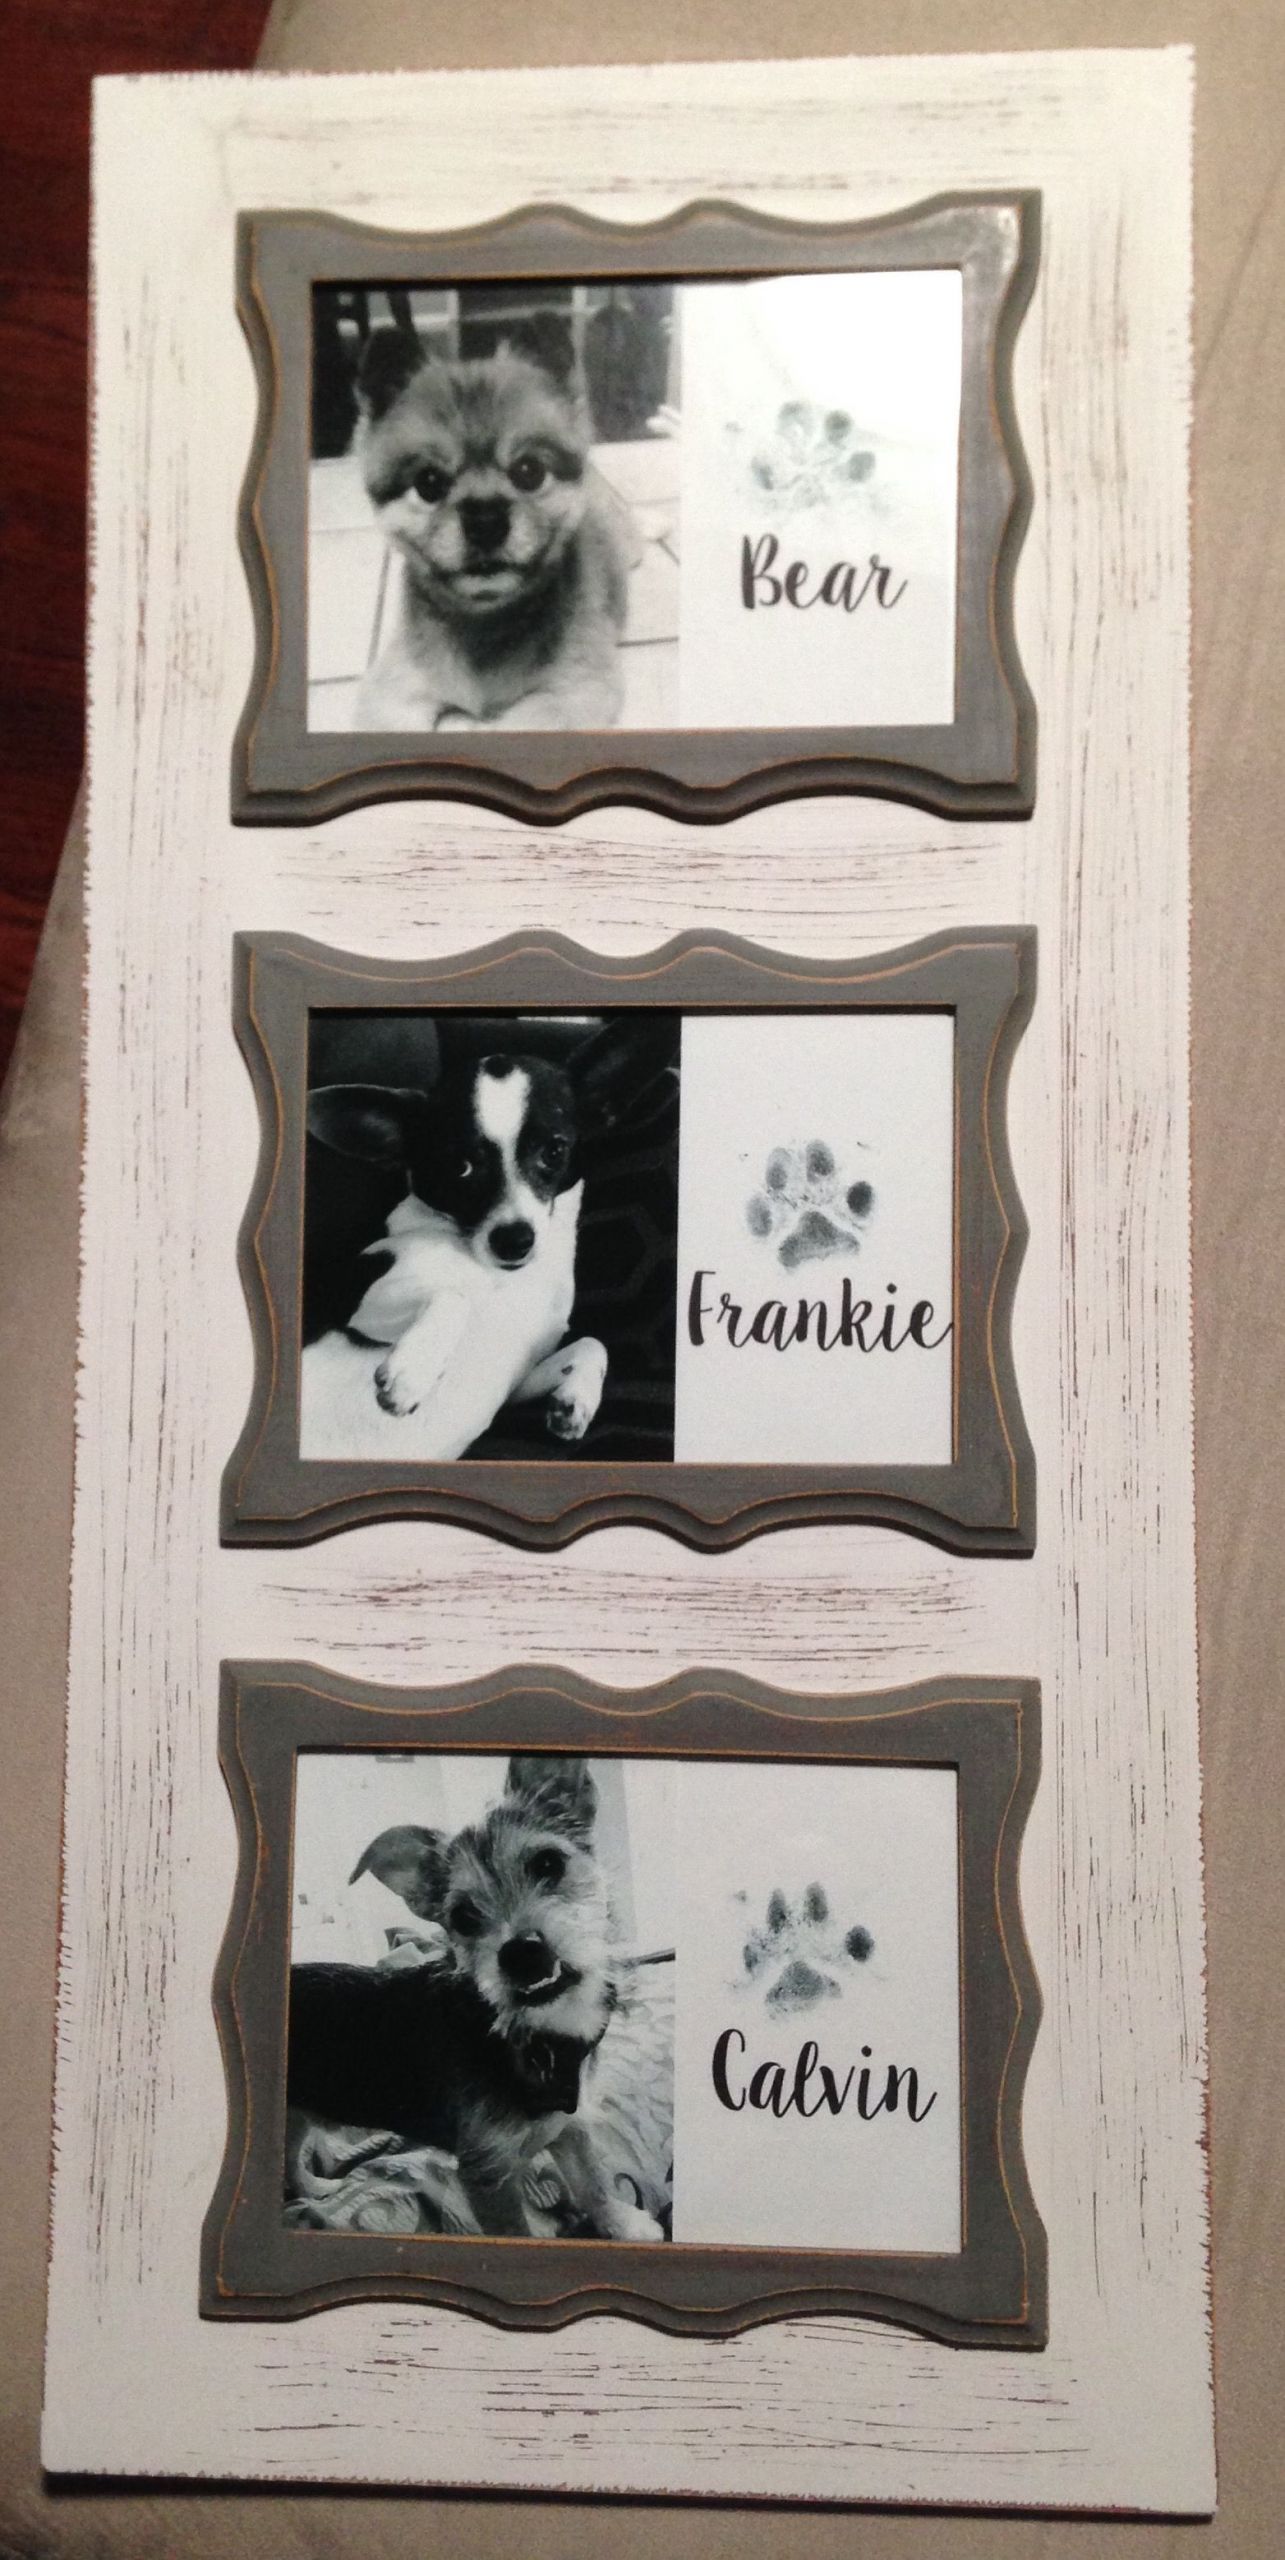 Diy Baby Footprint Ink
 Framed paw print art Frame is from Hobby Lobby and I used